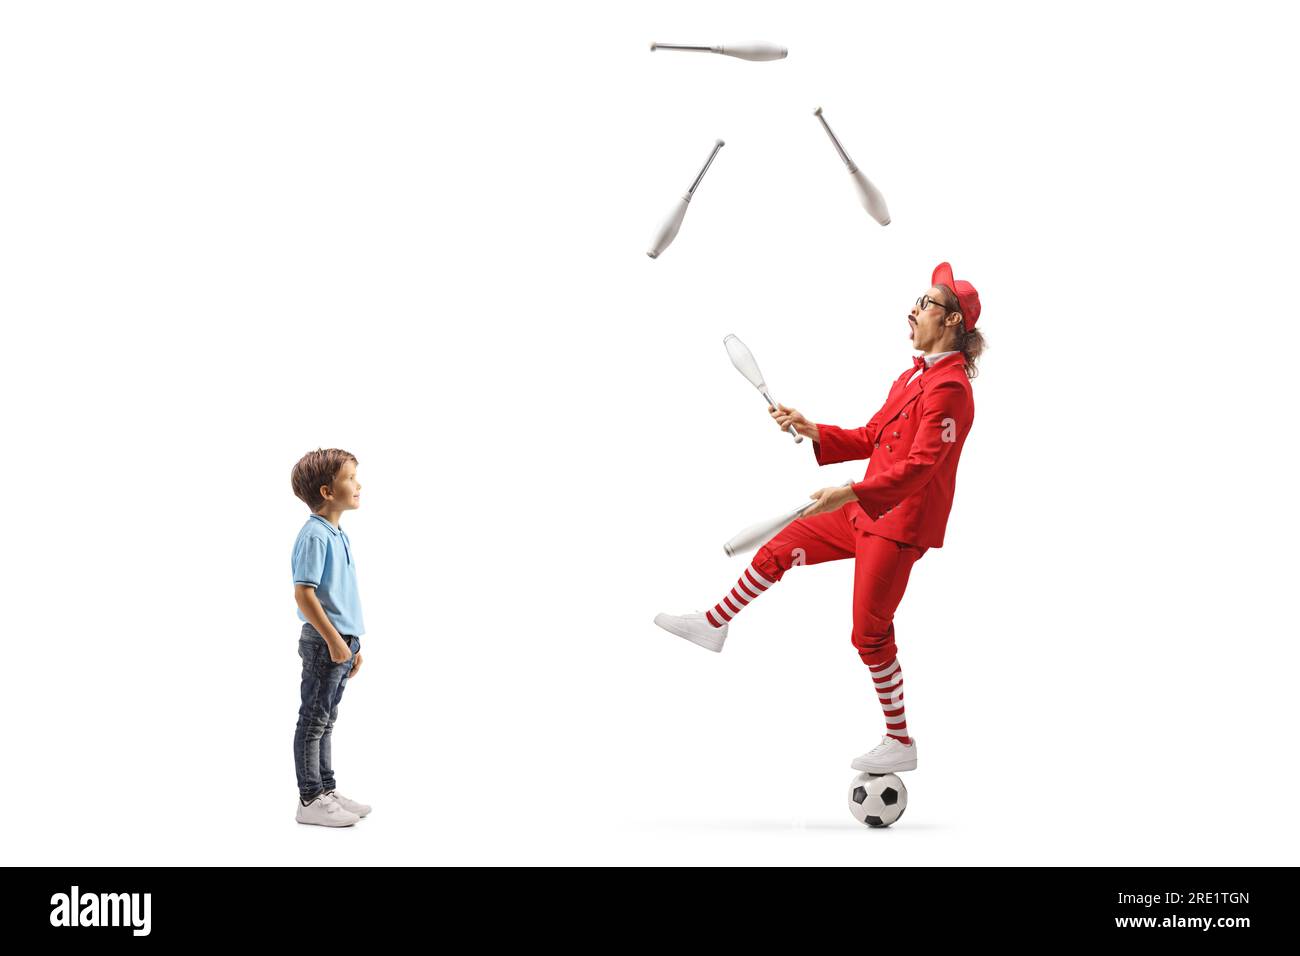 Boy watching a man in a red suit standing on a football and juggling isolated on white background Stock Photo